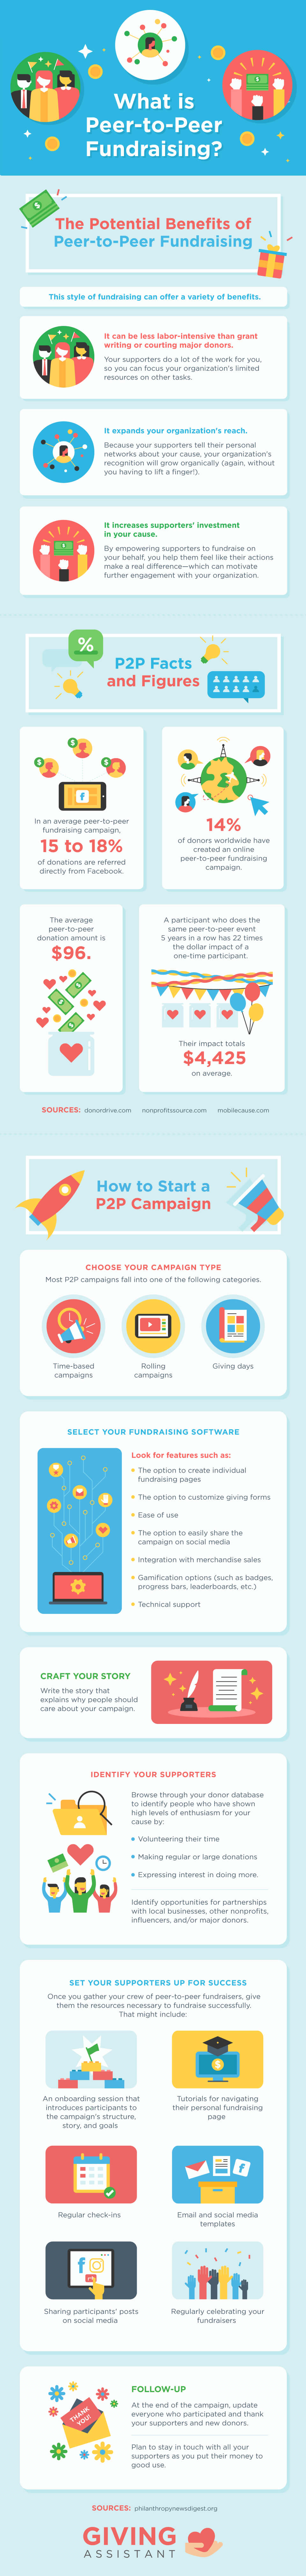 Infographic for nonprofits about peer-to-peer fundraising